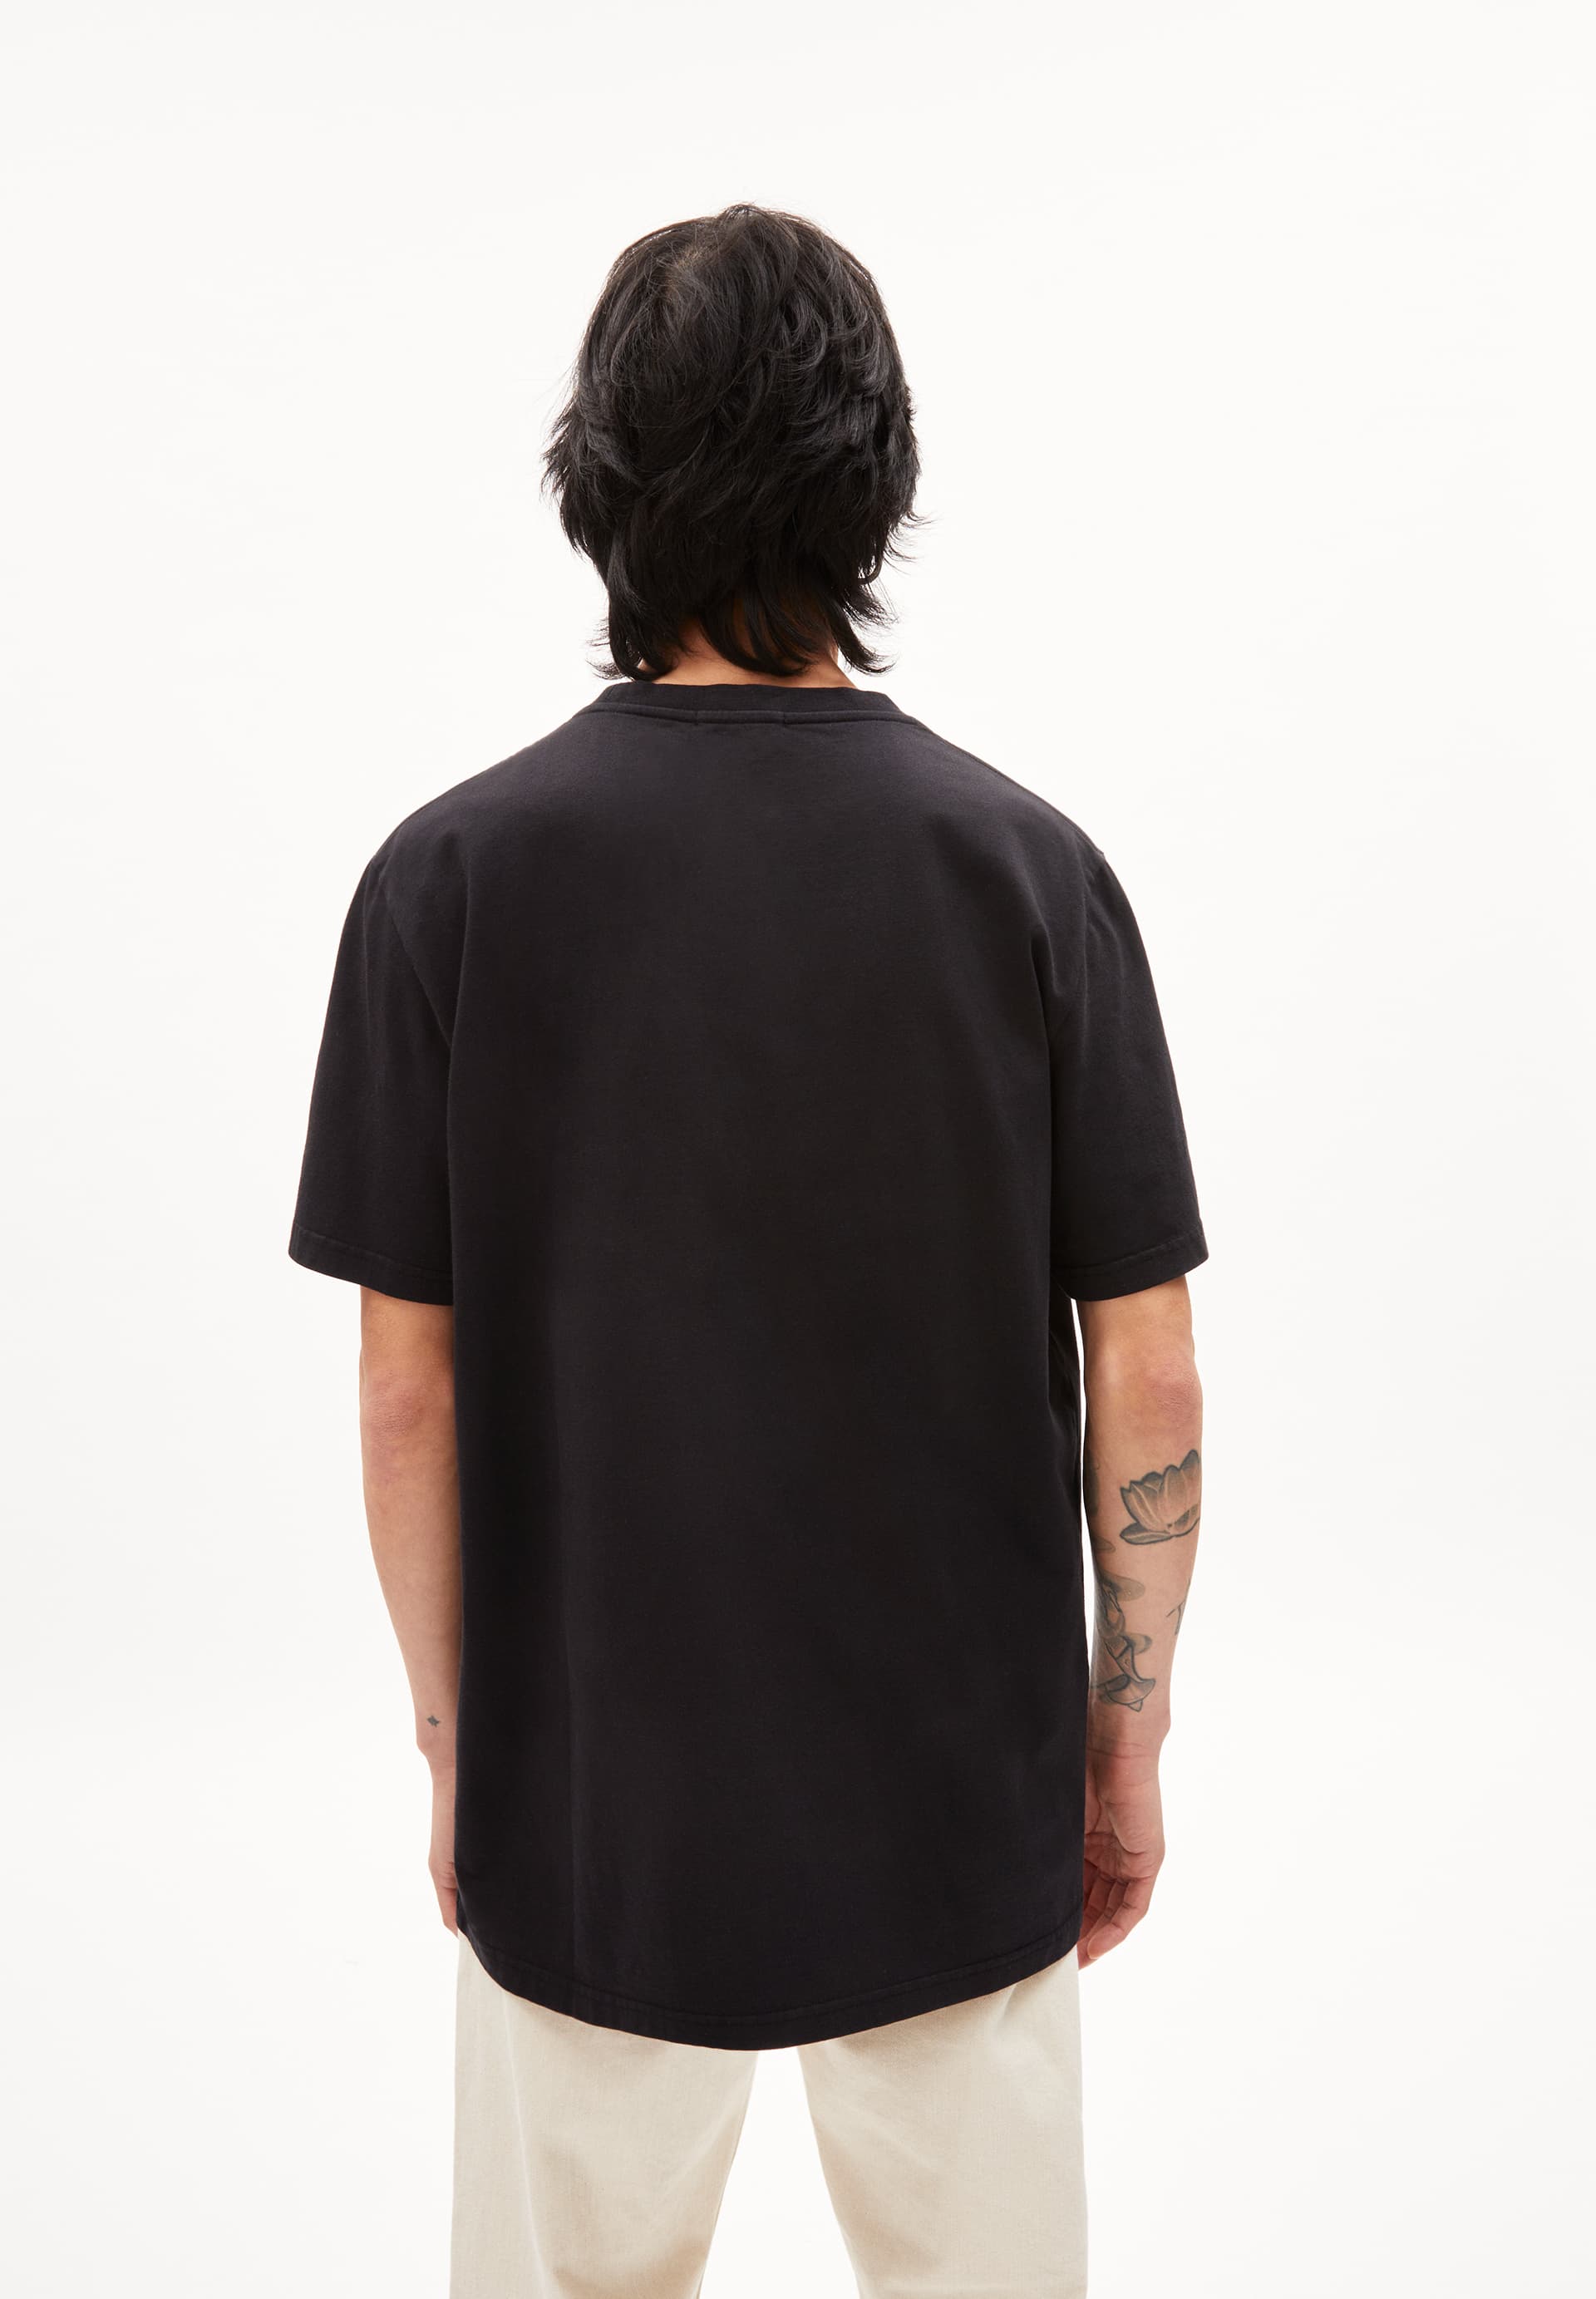 AADONI A SIGNATURE T-Shirt Relaxed Fit made of Organic Cotton